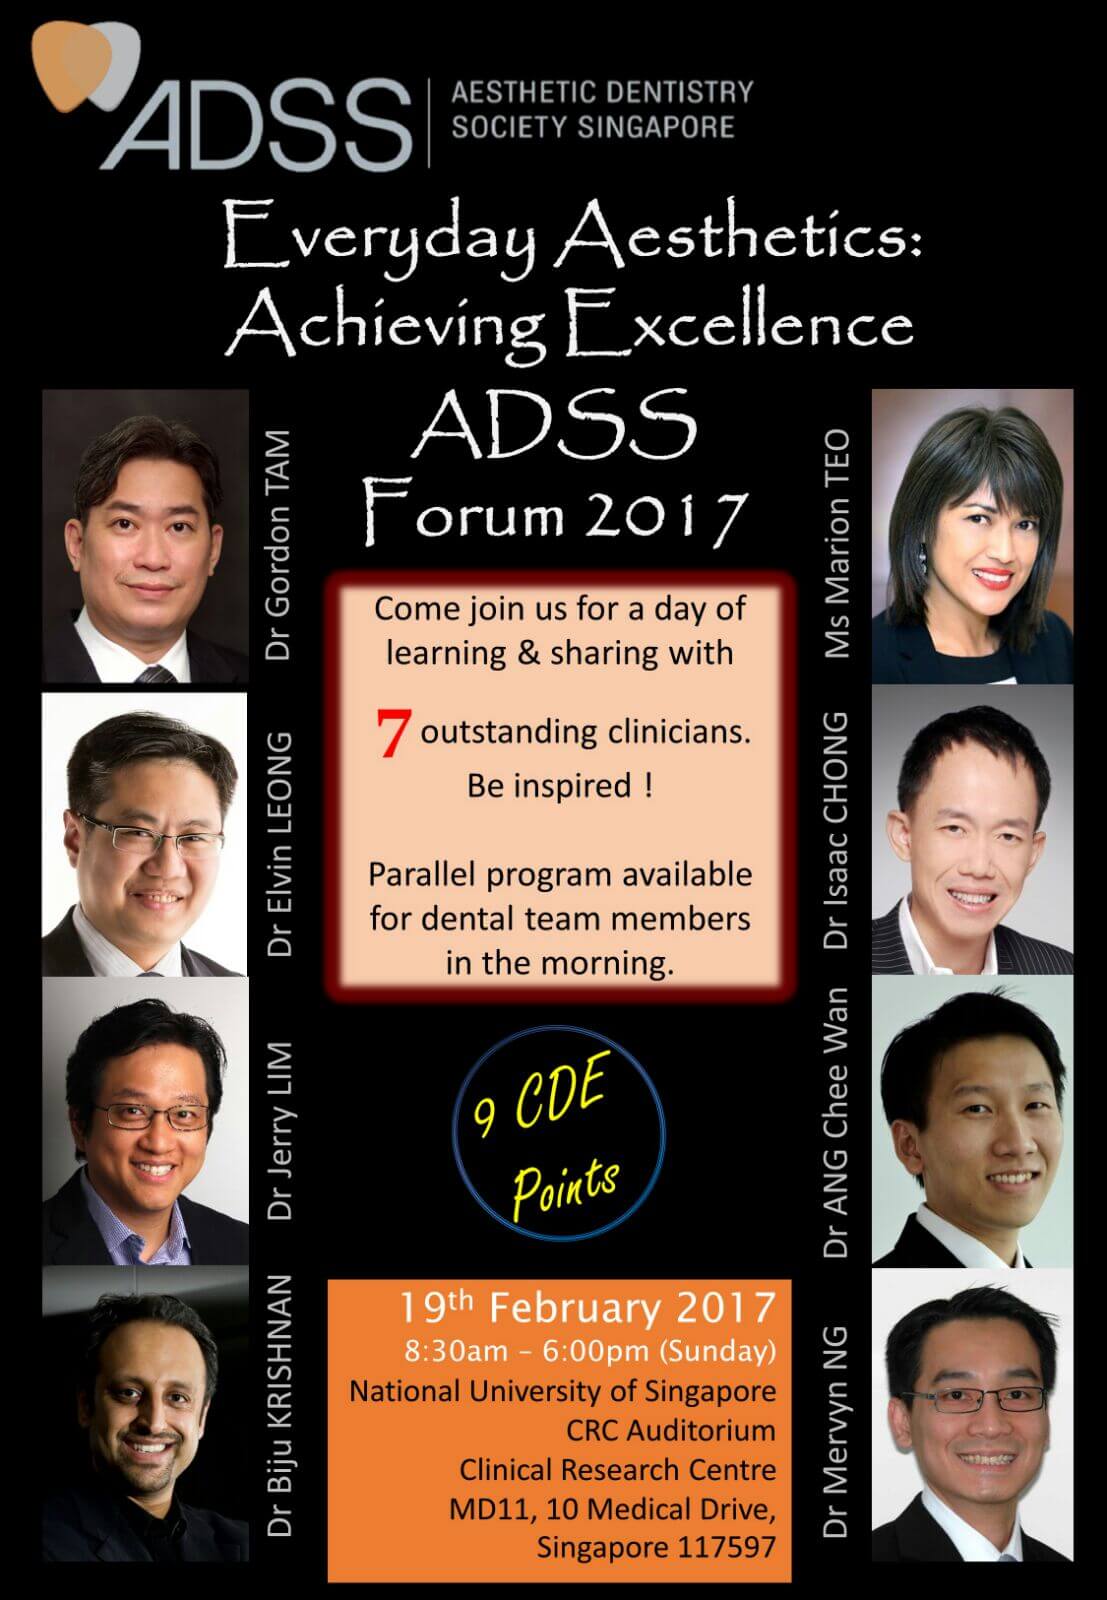 Dr Isaac Chong was invited by the Aesthetic Dentistry Society of Singapore to give a lecture during their Annual Dental Forum